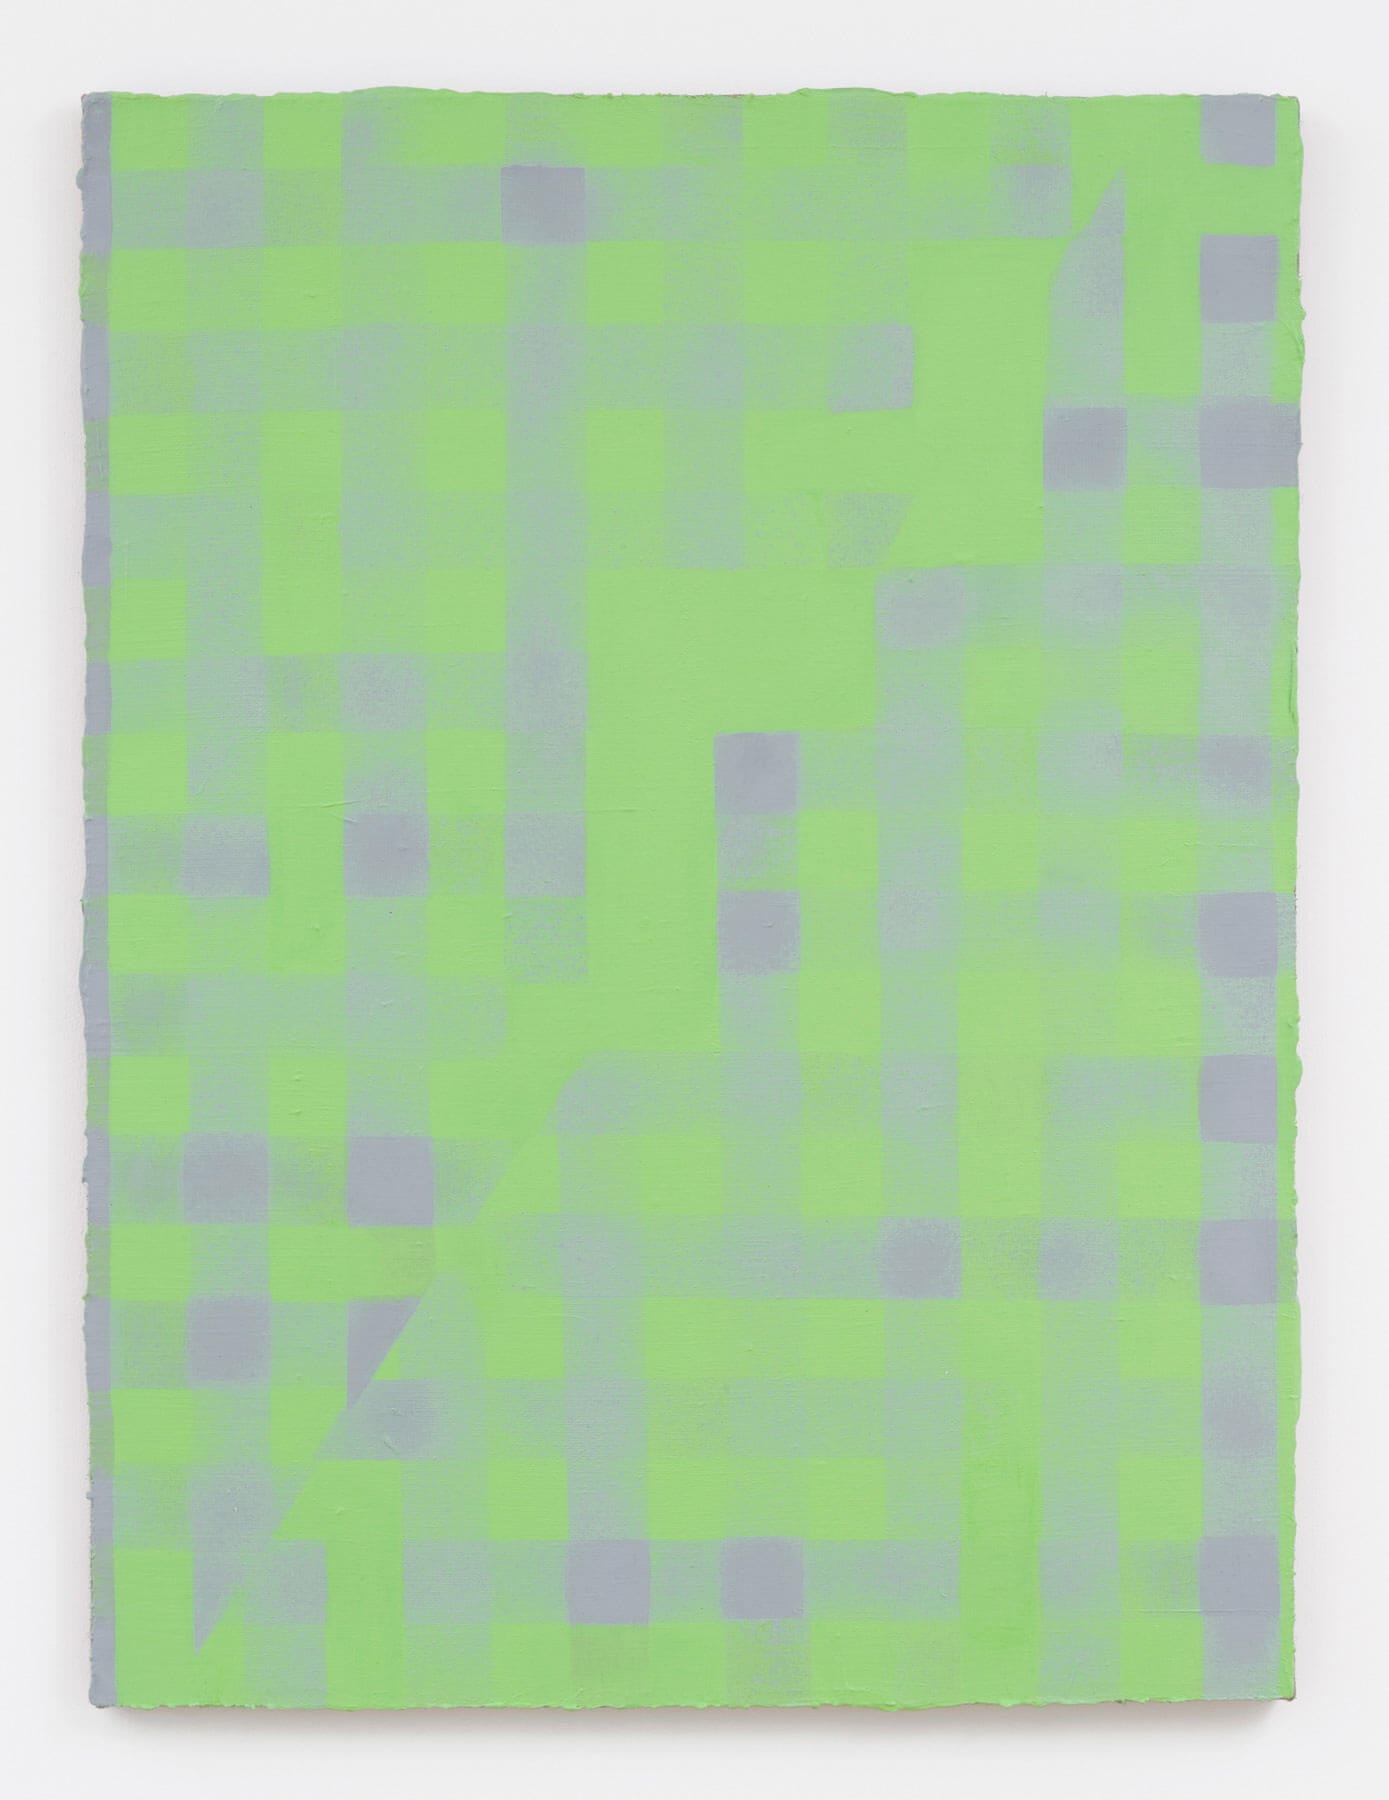 Cheryl Donegan
                                        'Untitled (spring green and blue grey on pink)', 2013
                                        40 x 30 Inches
                                        acrylic on jute
                                        